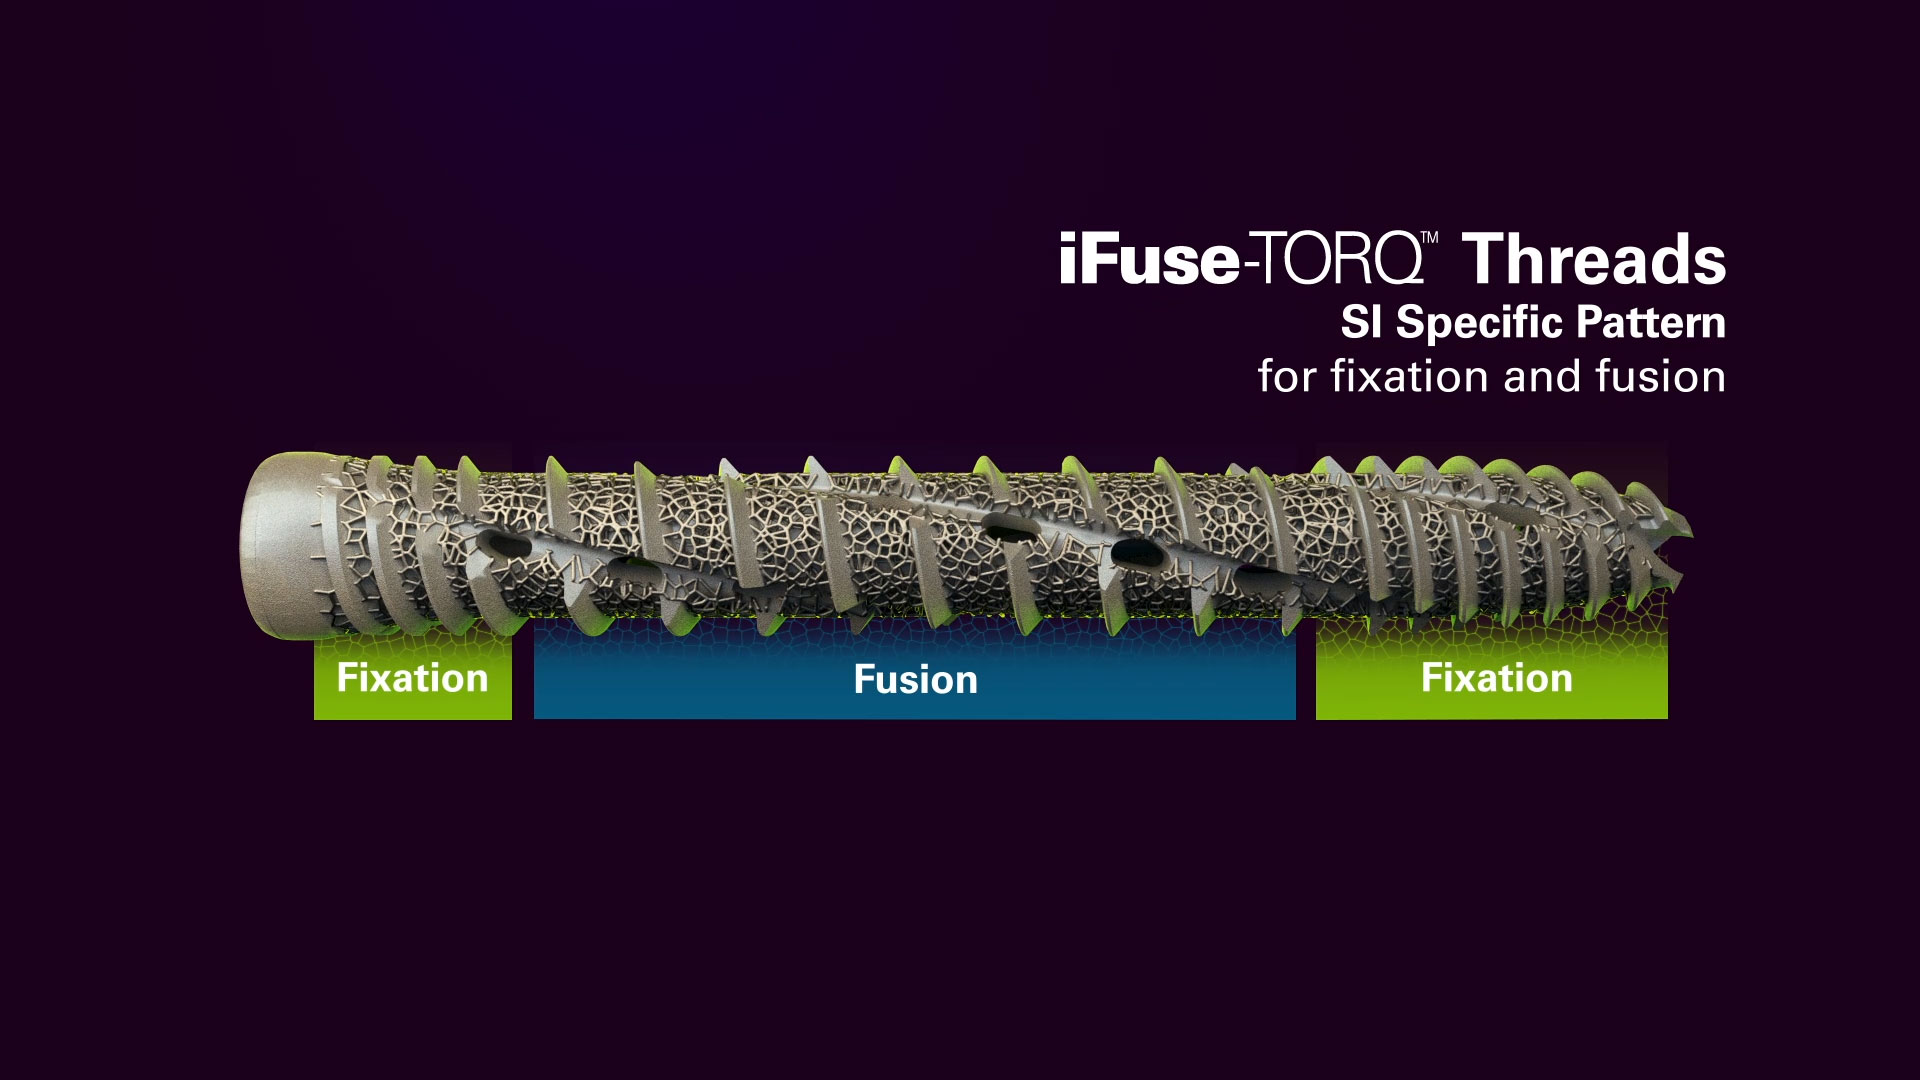 iFuse Torq Implant System